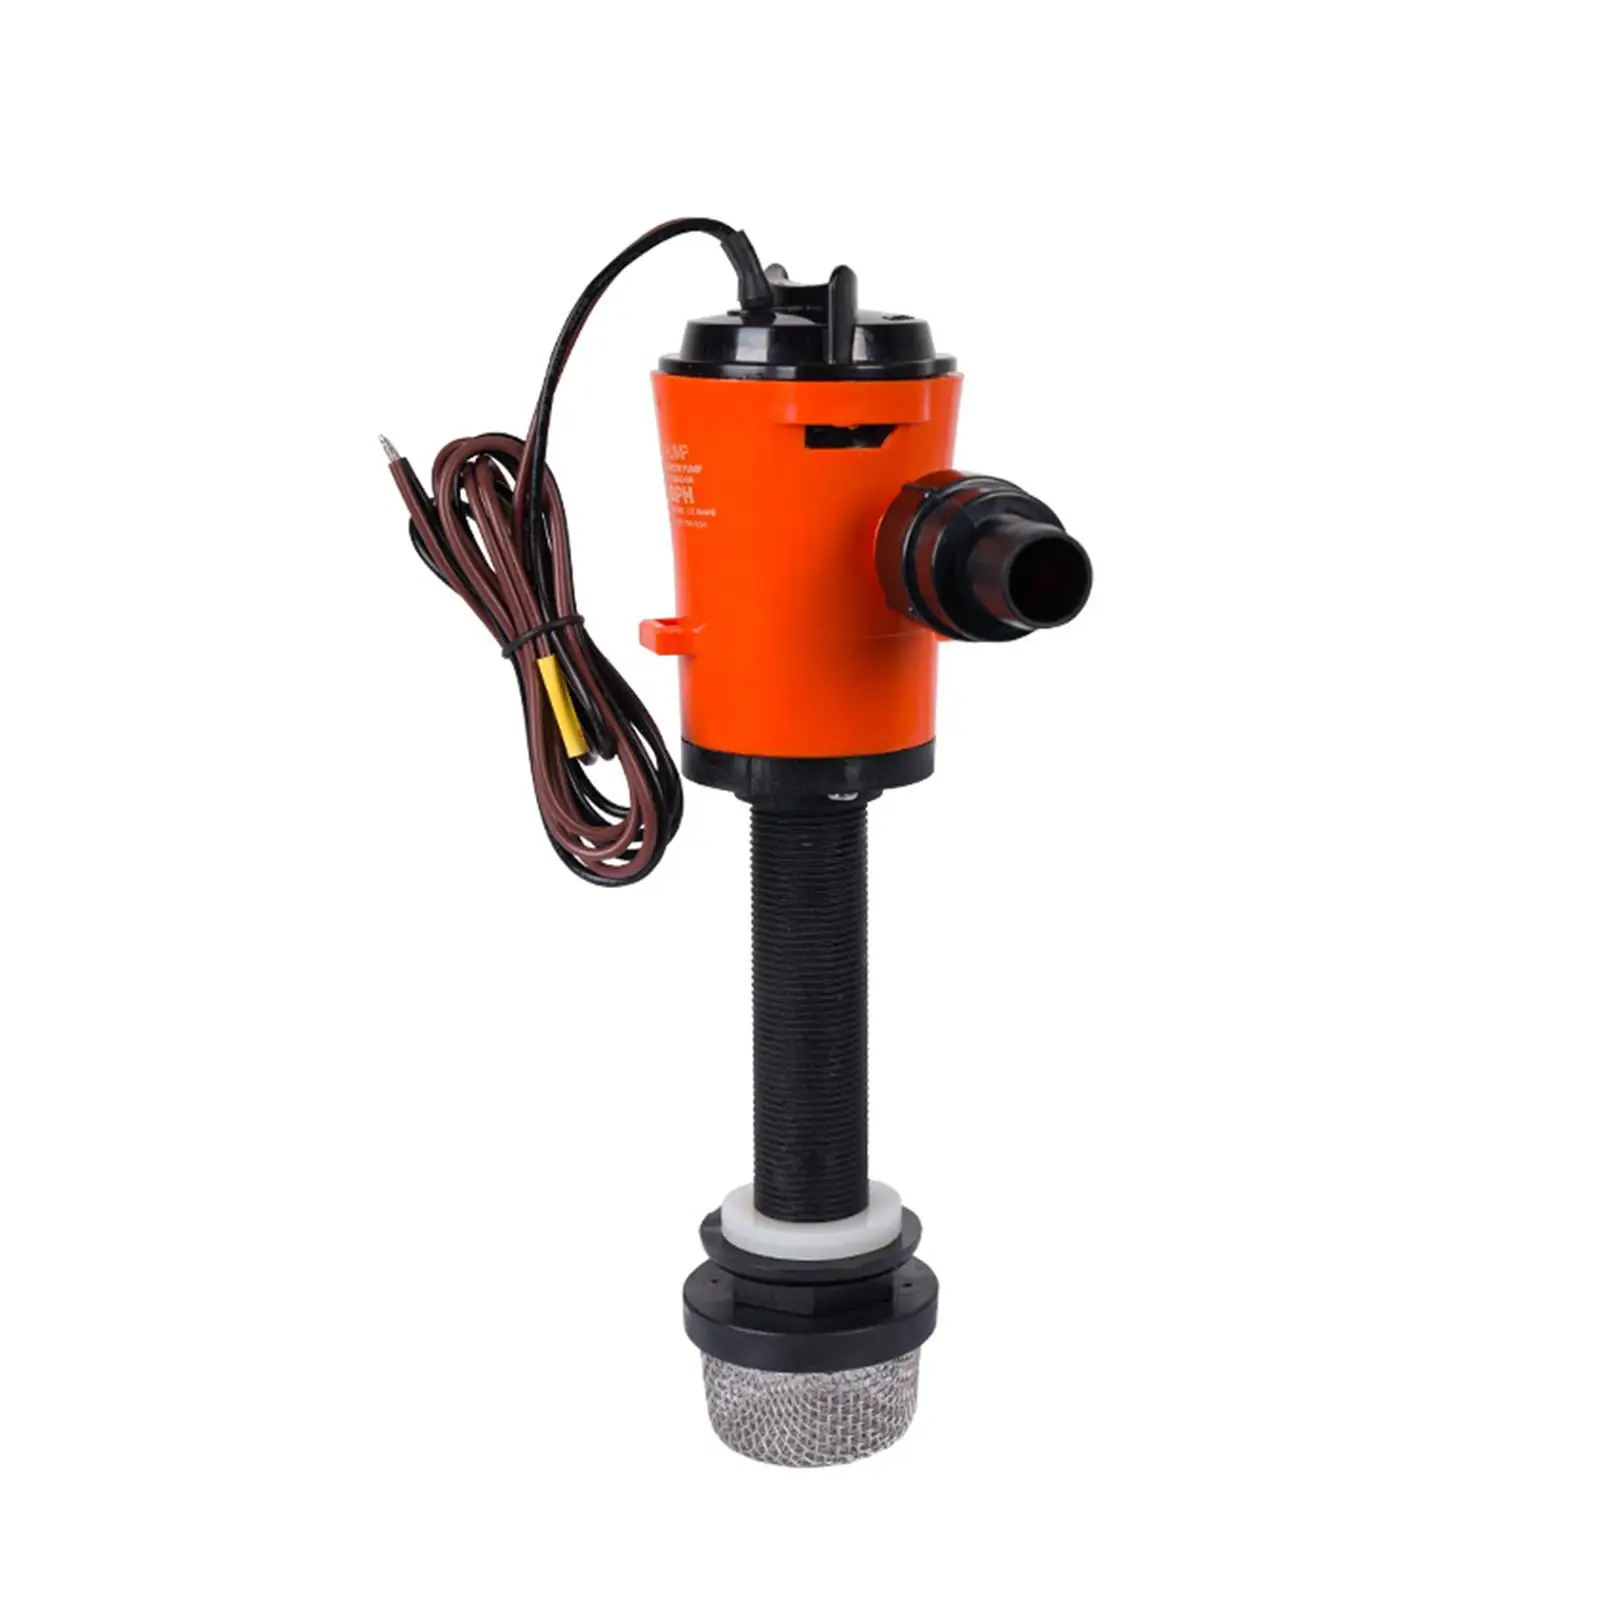 Livewell Pump for Boat Easy to Clean with Filter Easy to Install Professional Removable Spare Parts Replaces Boat Bilge Pump